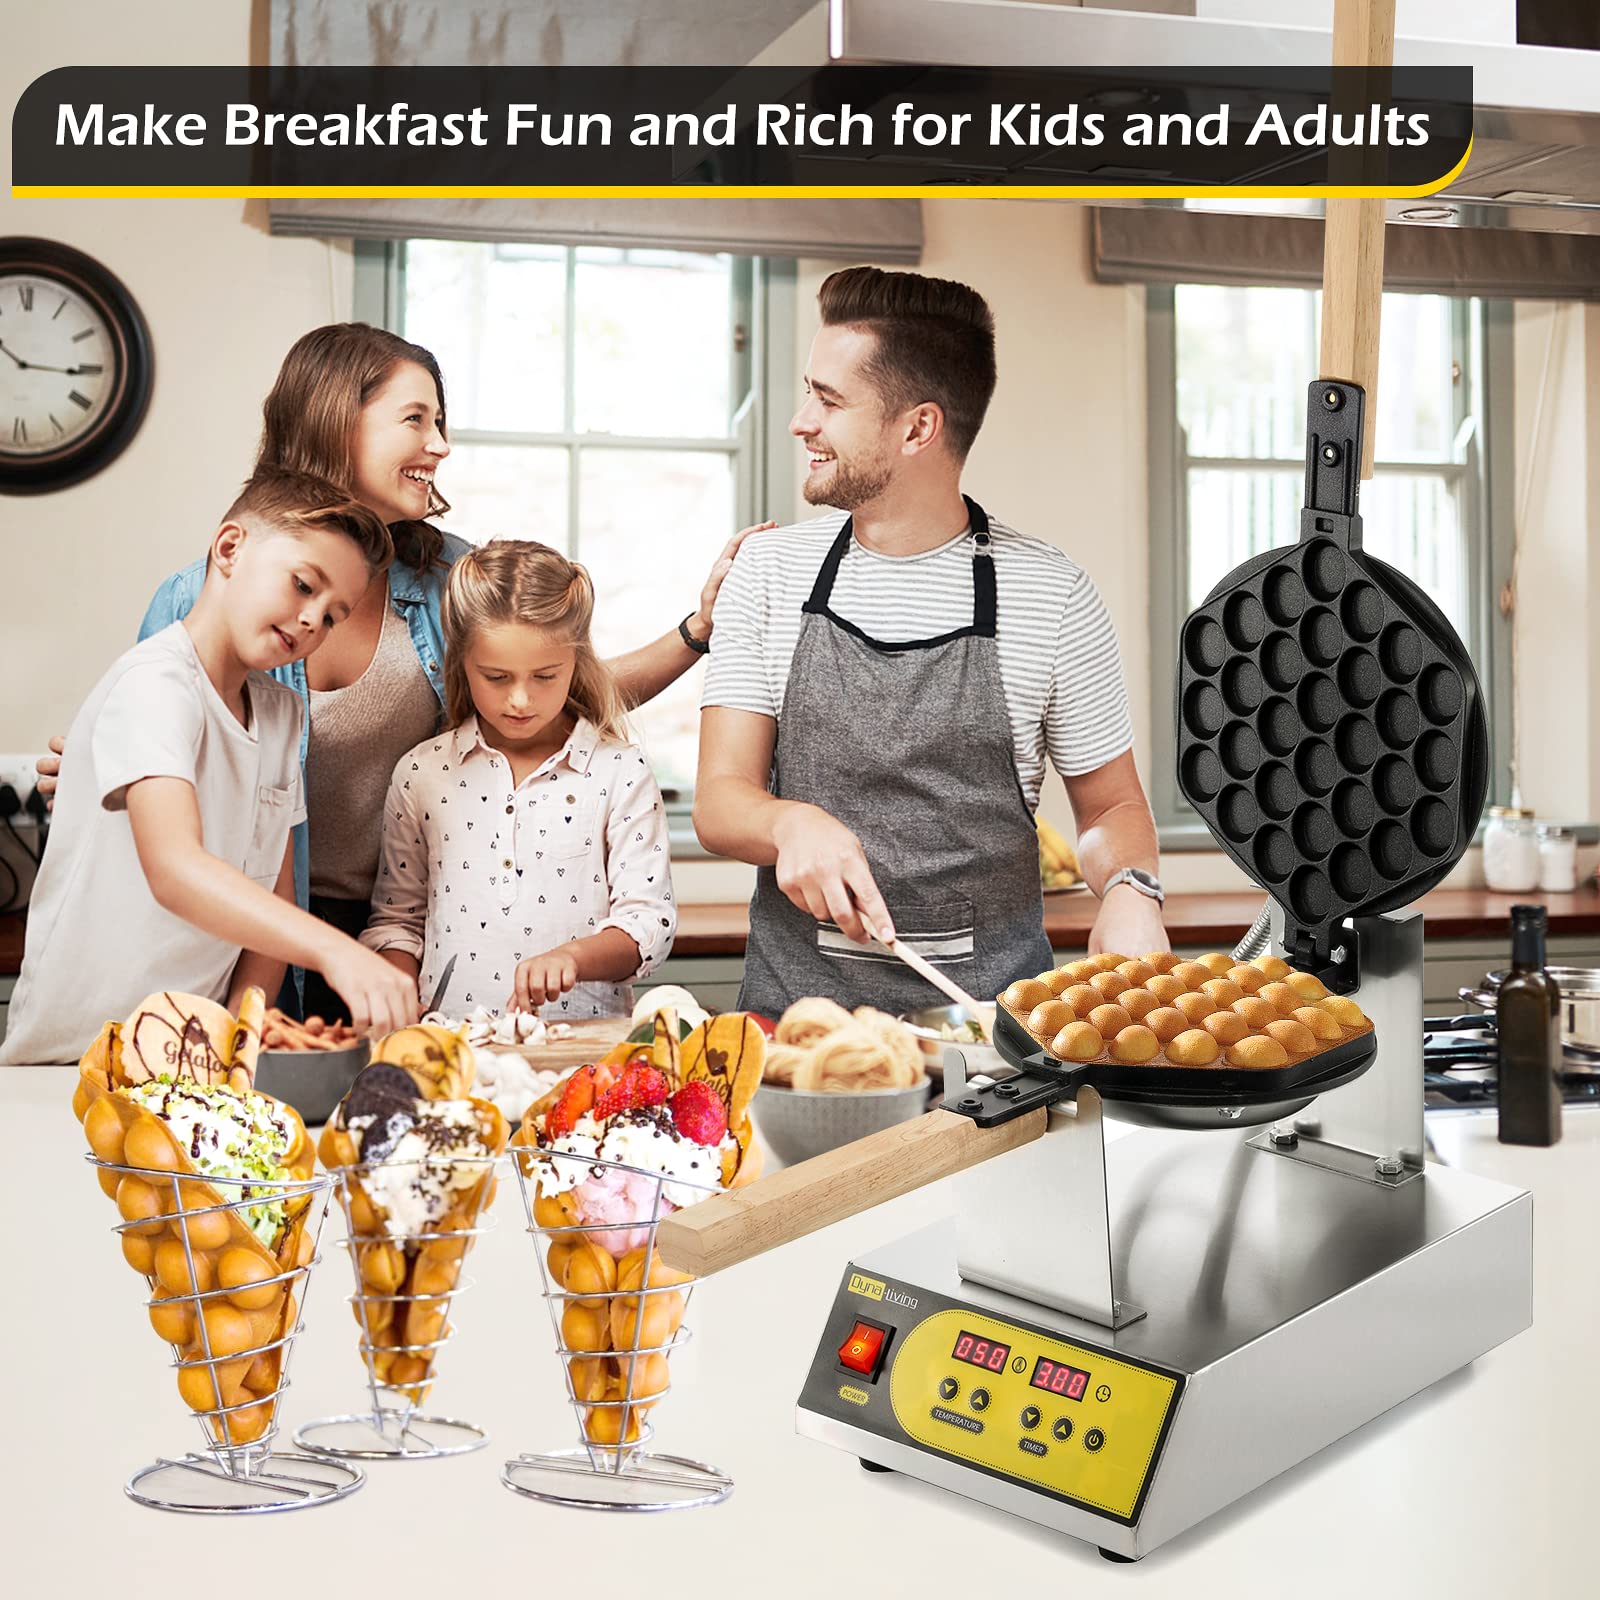 Dyna-Living Bubble Waffle Maker Commercial Intelligent Hong Kong Egg Waffle Maker 1400W Bubble Waffle Maker Machine with Non-stick Coating,LED Digital Display,110V